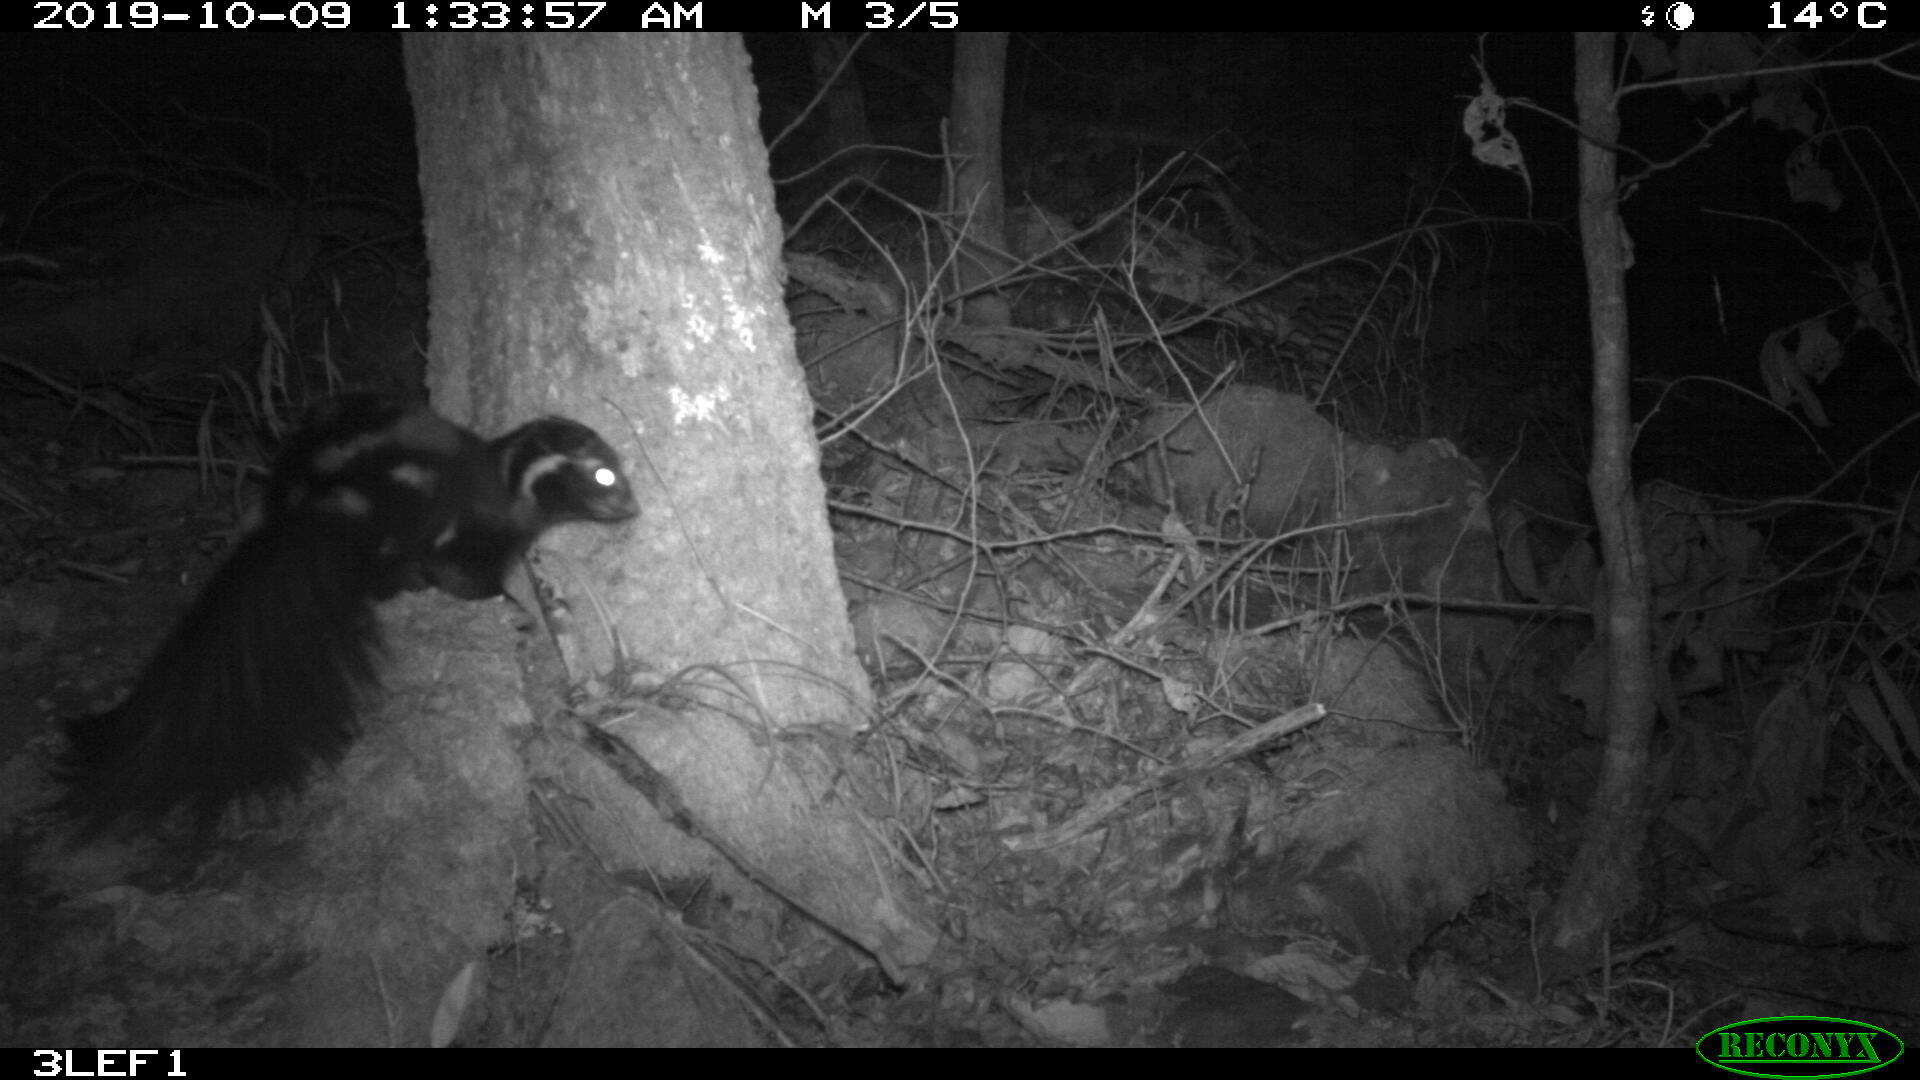 Image of Allegheny Spotted Skunk